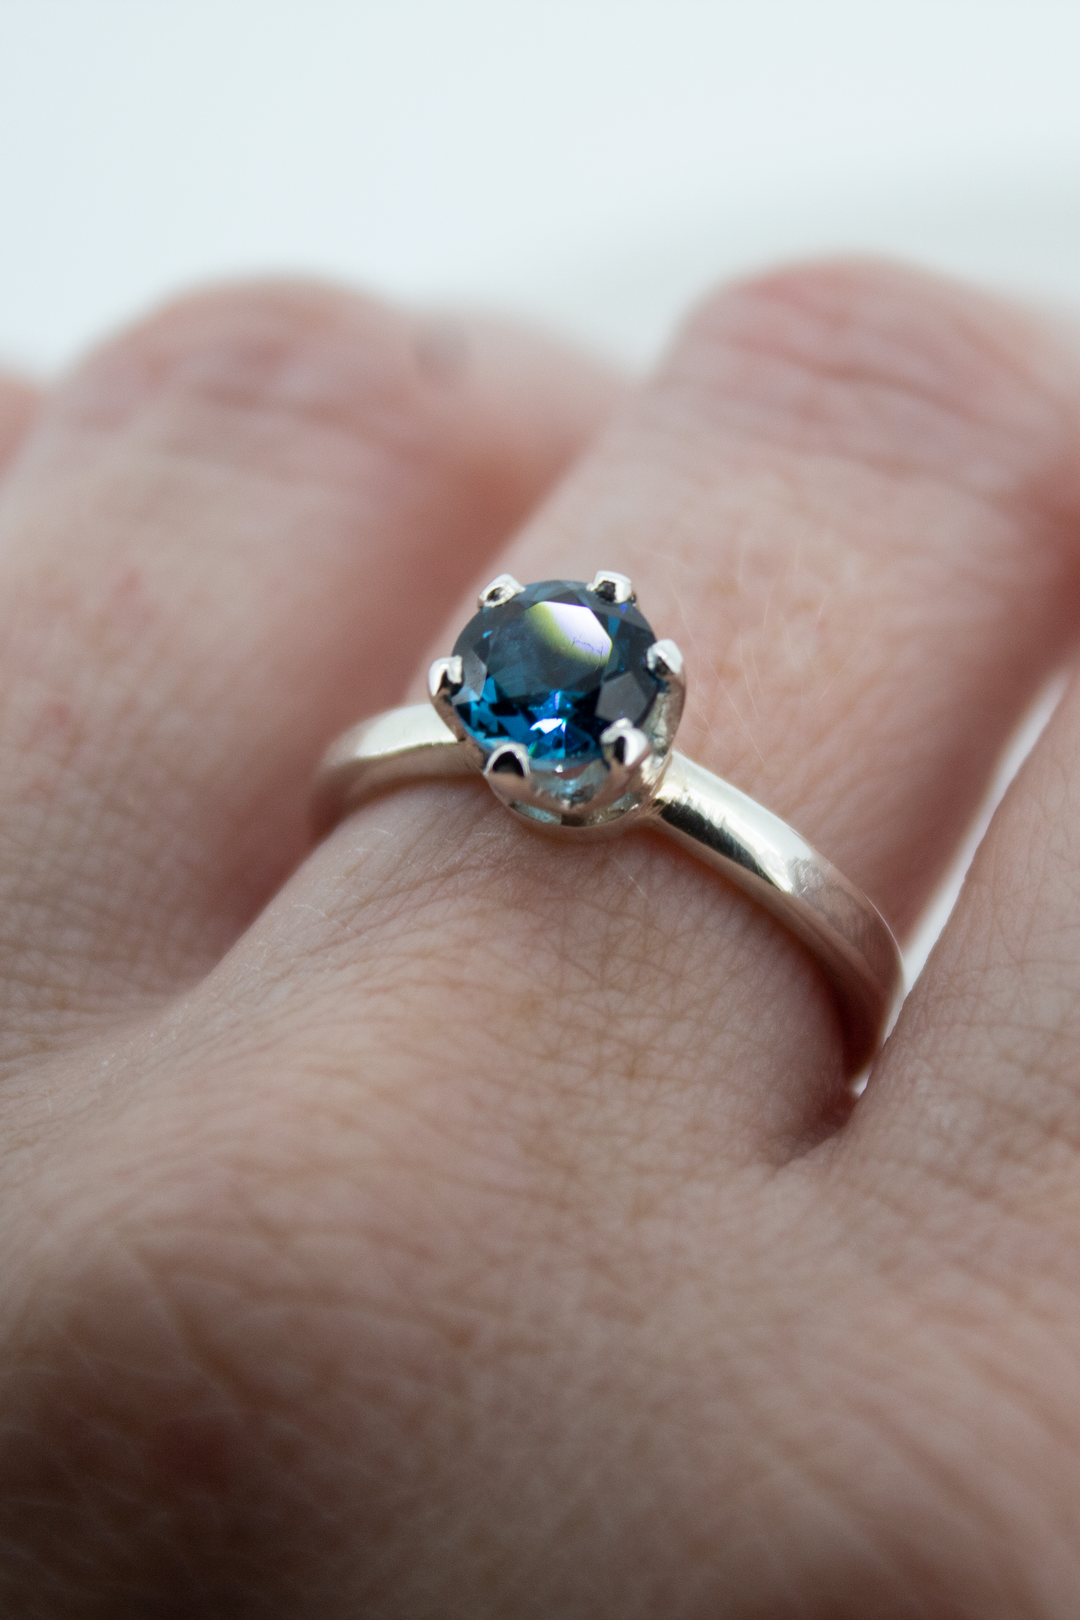 6mm London Blue Topaz Solitaire Ring